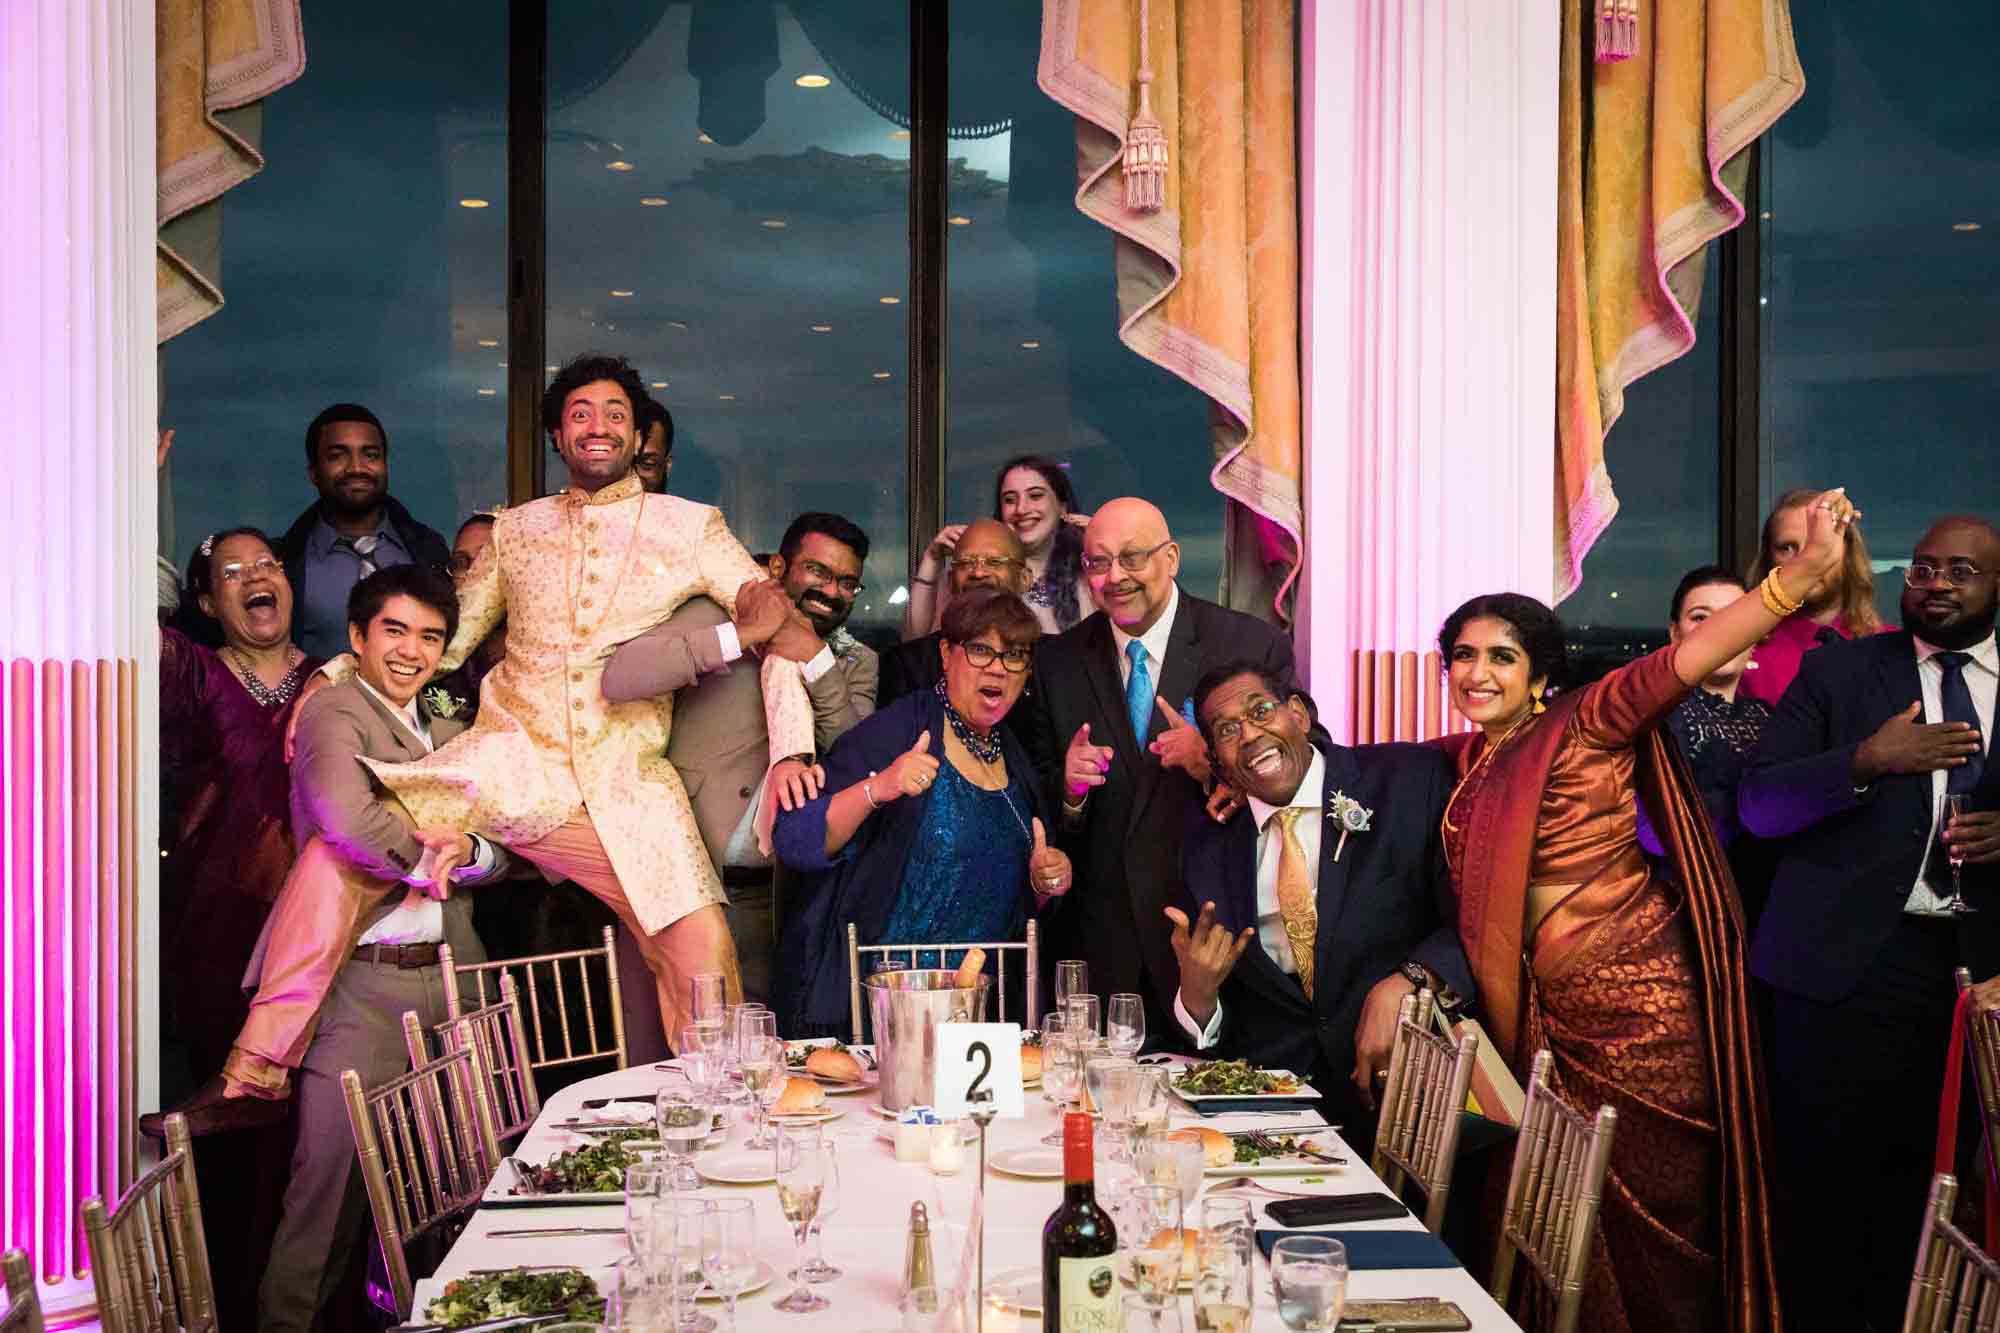 Guests posing with Indian bride and groom during a Terrace on the Park wedding